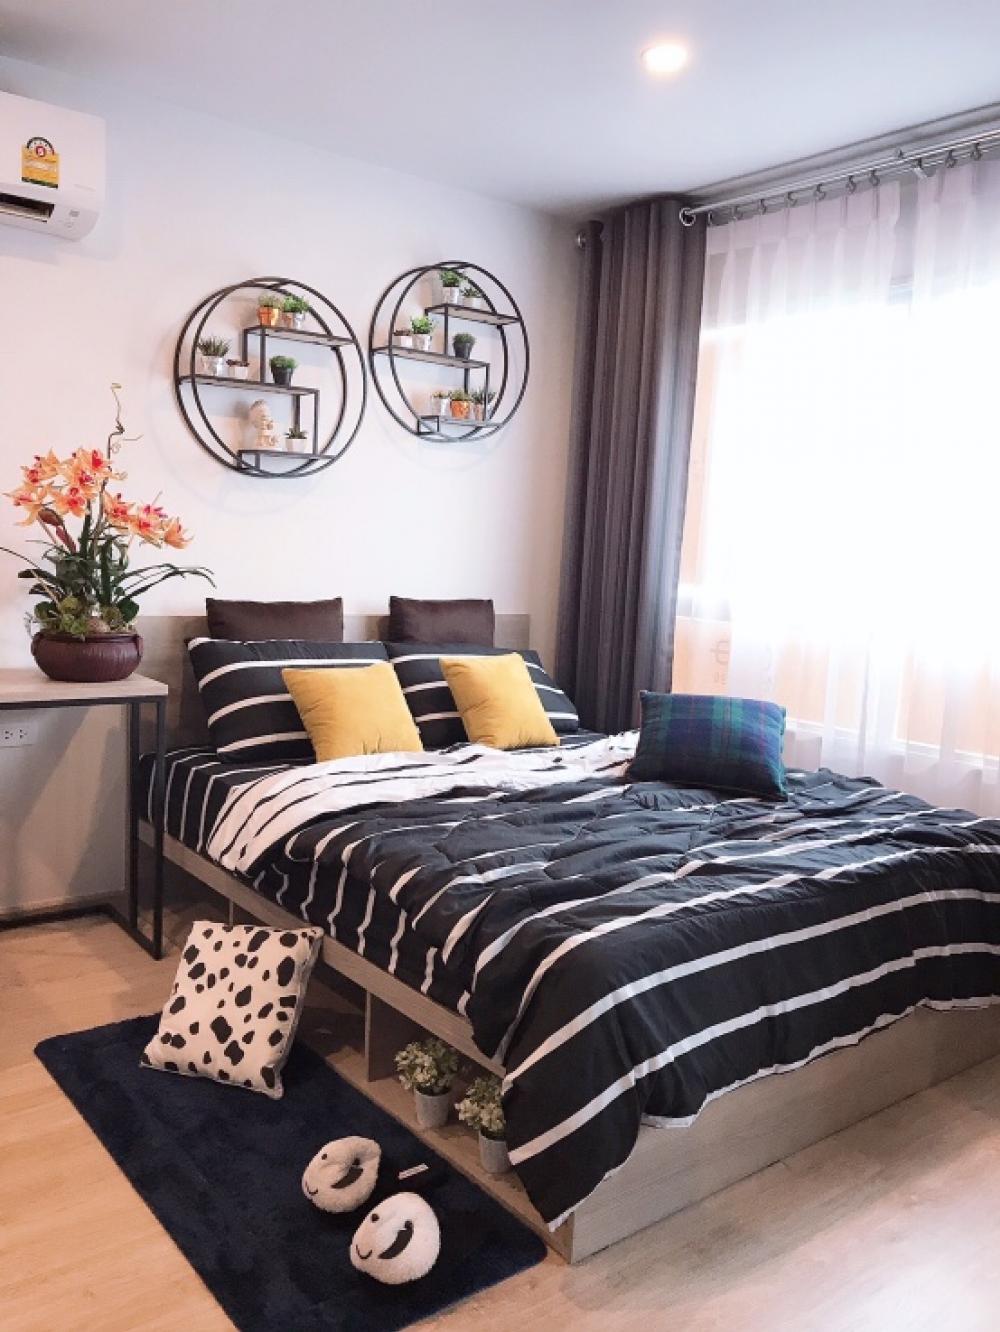 For RentCondoKasetsart, Ratchayothin : ** Very beautiful room ** 🌆 For rent Elio del moss (Phahon 34) 🏫 Condo near Kasetsart University 🏫 Condo near Sripatum University 🚝 Bts Senanikom 💰 Rent 9,500 / month ** Fully furnished, electrical appliances There is a washing machine. If interested, tal